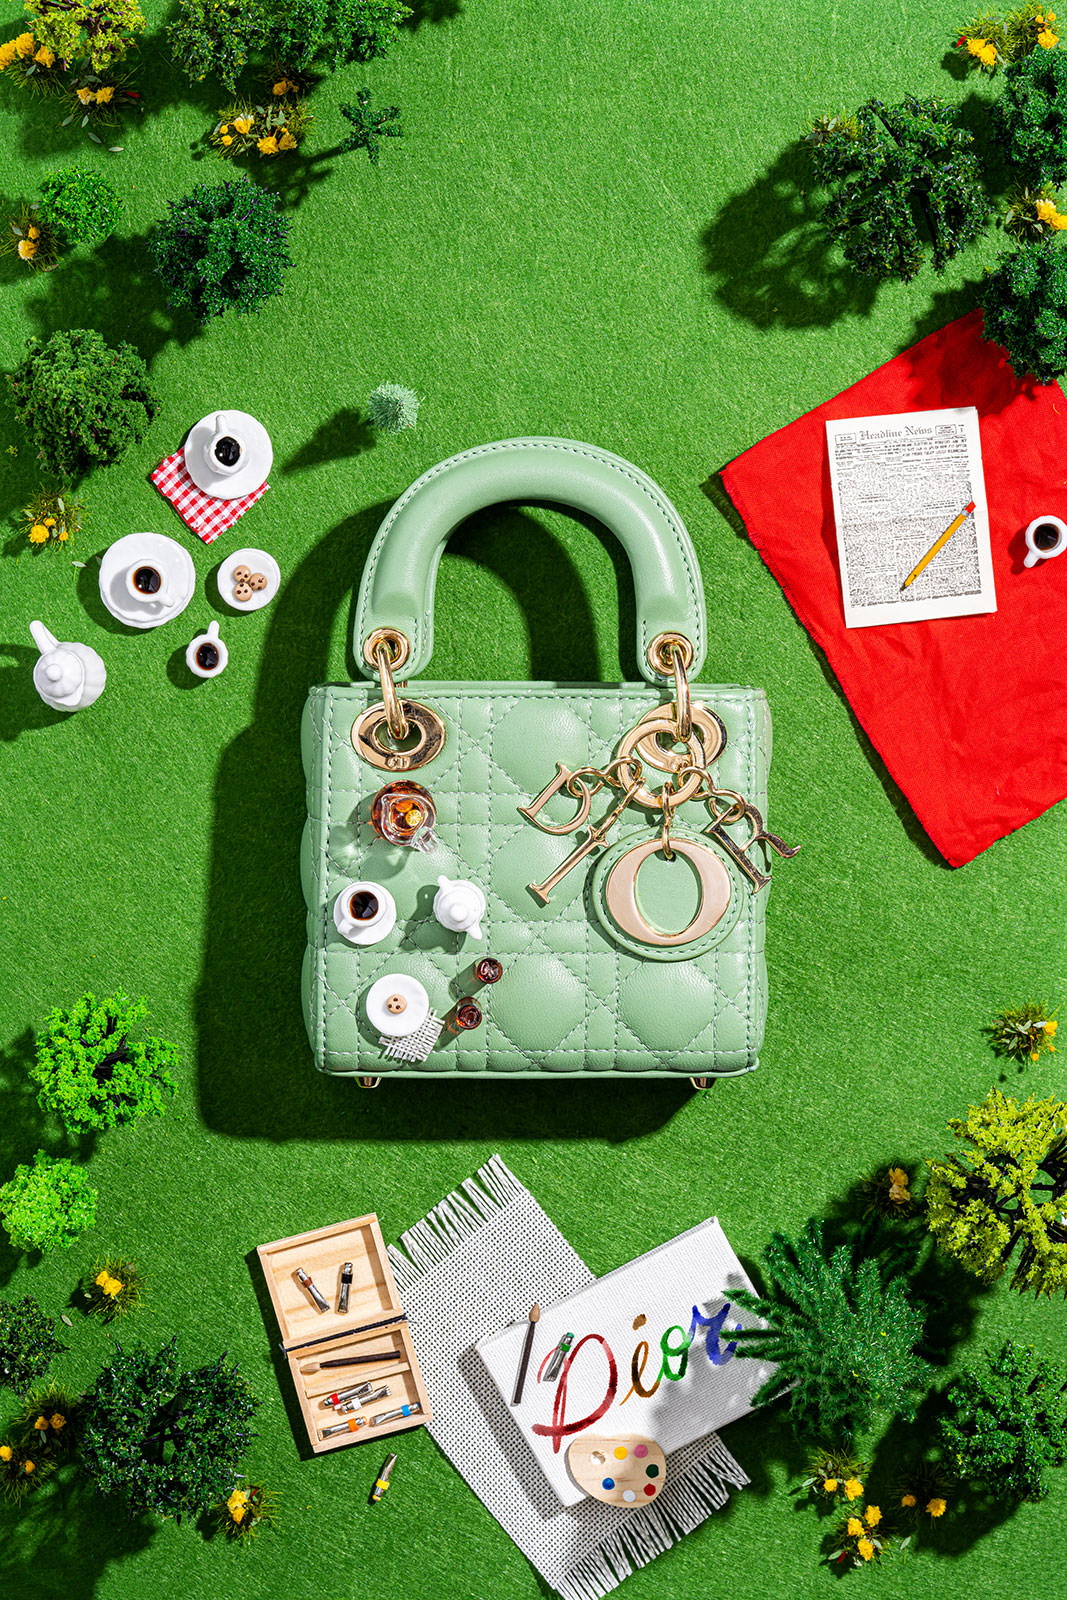 Dior's New Micro Collection Has Tiny Saddle & Lady Dior Bags